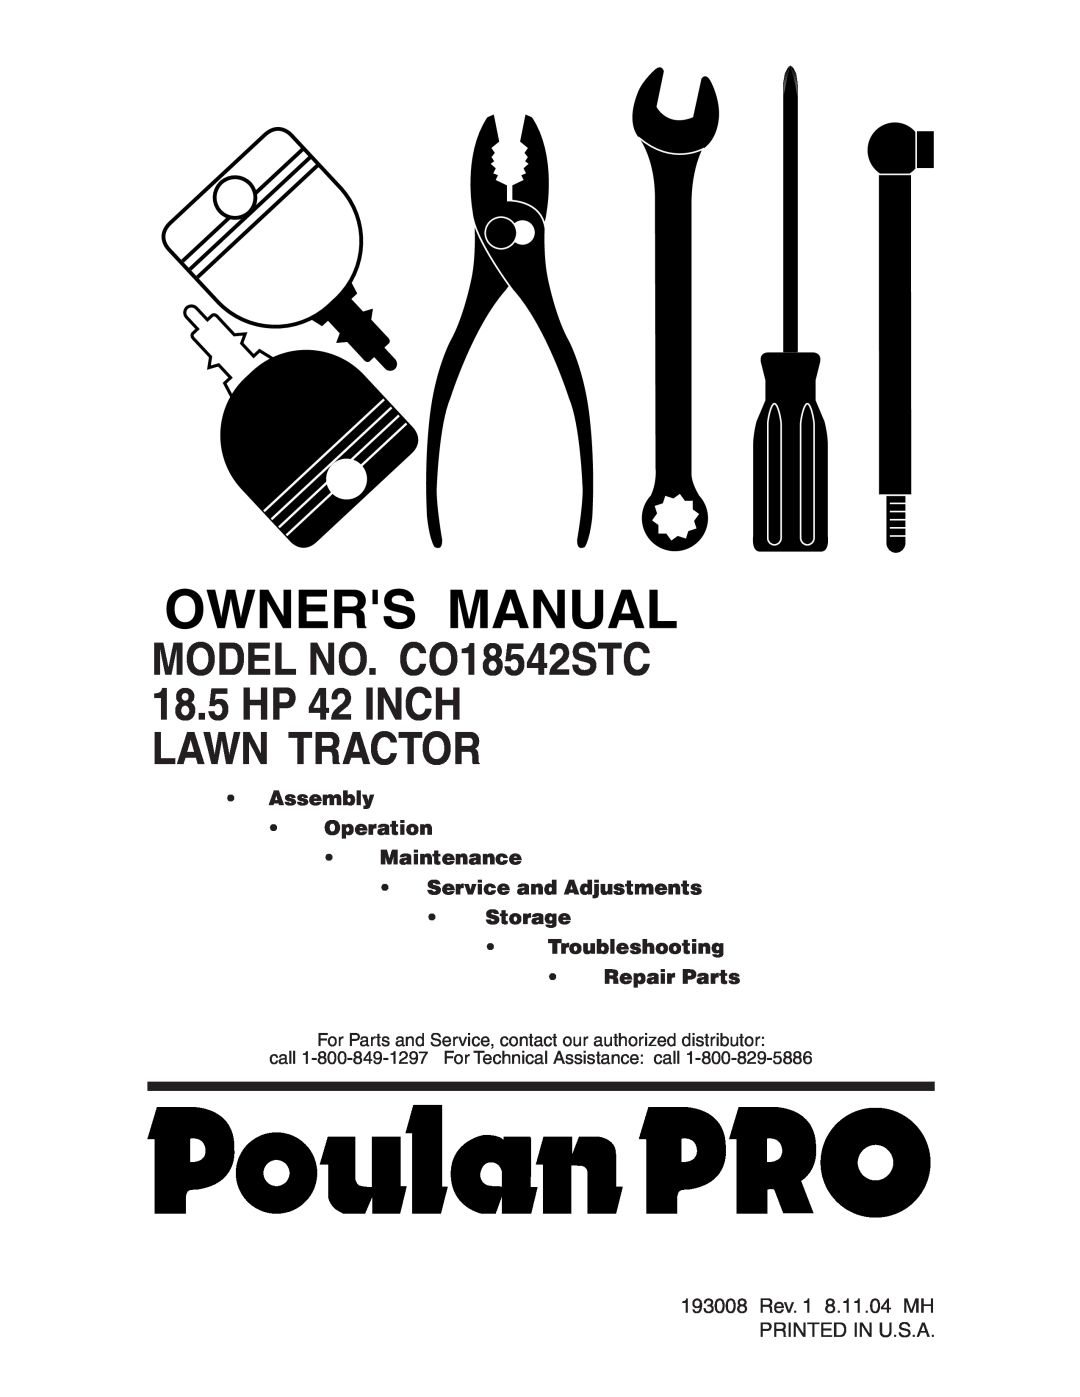 Poulan manual MODEL NO. CO18542STC, 18.5 HP 42 INCH LAWN TRACTOR, Troubleshooting Repair Parts 